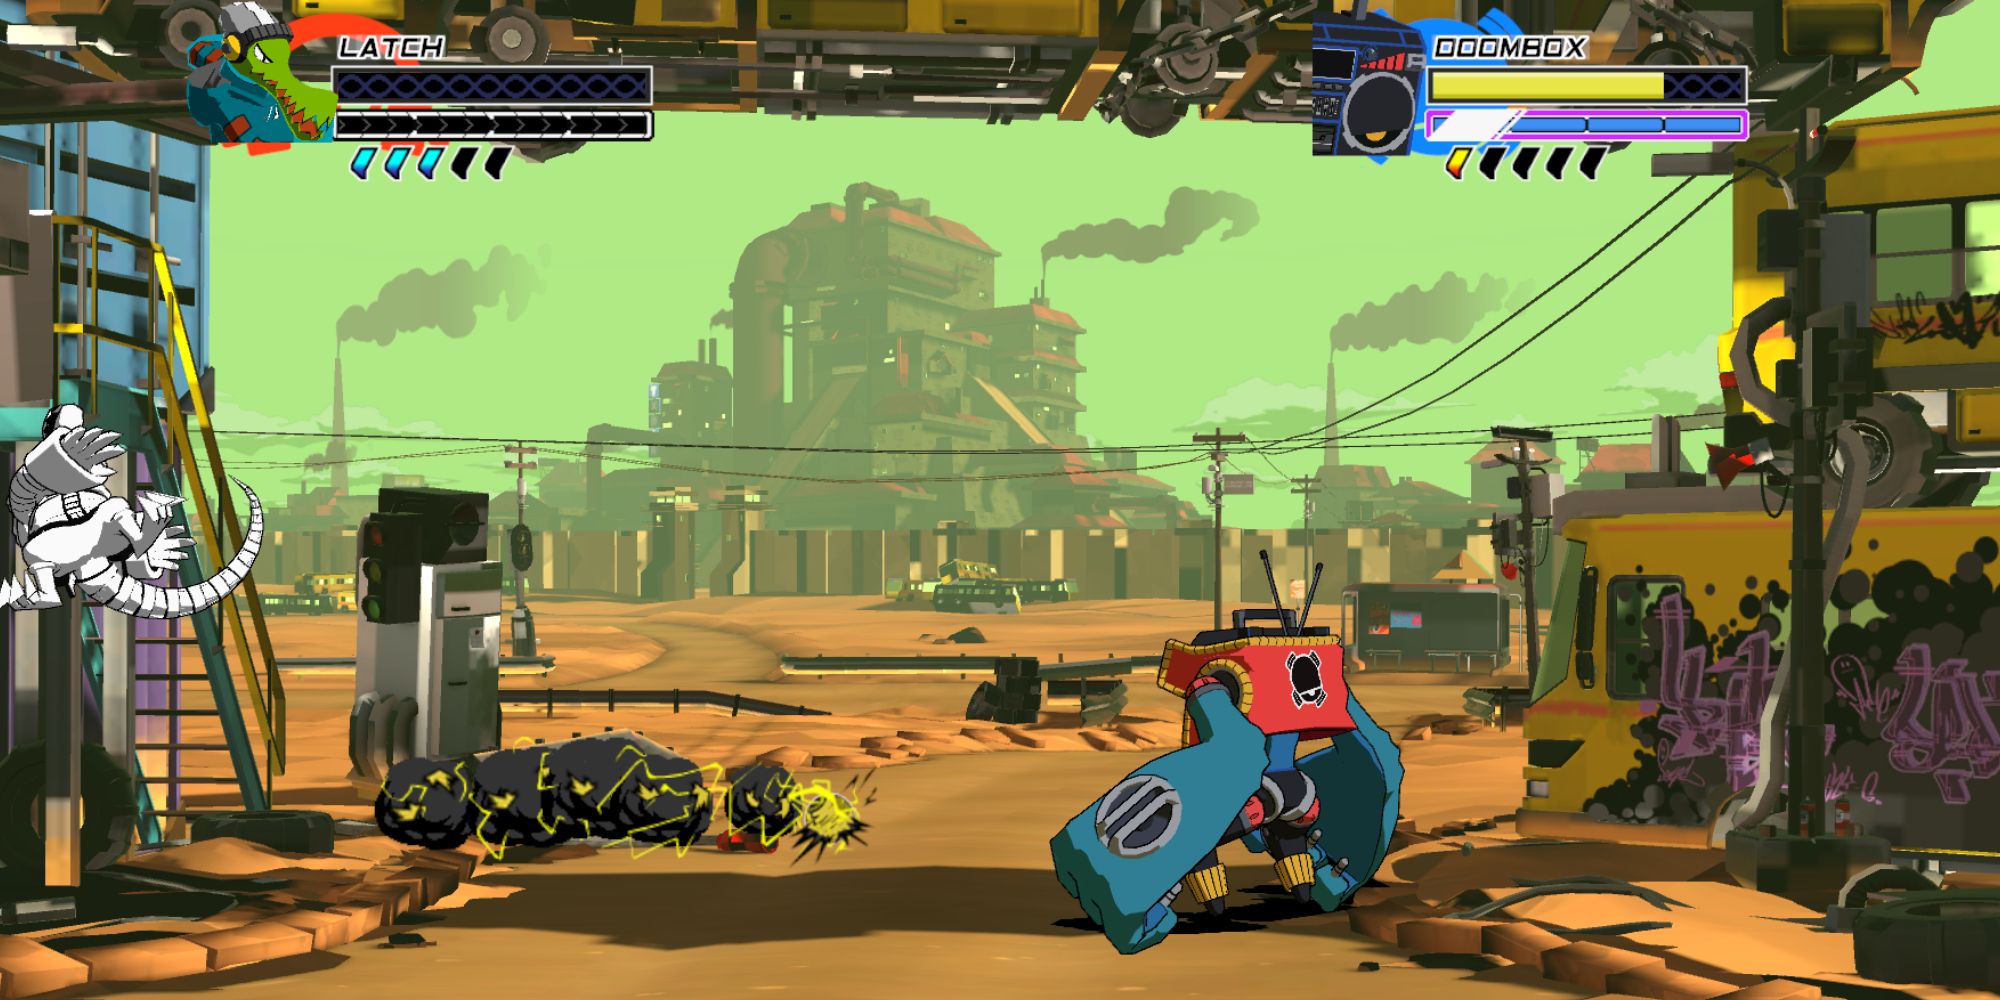 Lethal League Blaze a wide shot of Doombox on the right and Latch on the left all greyed out and being launched off the screen